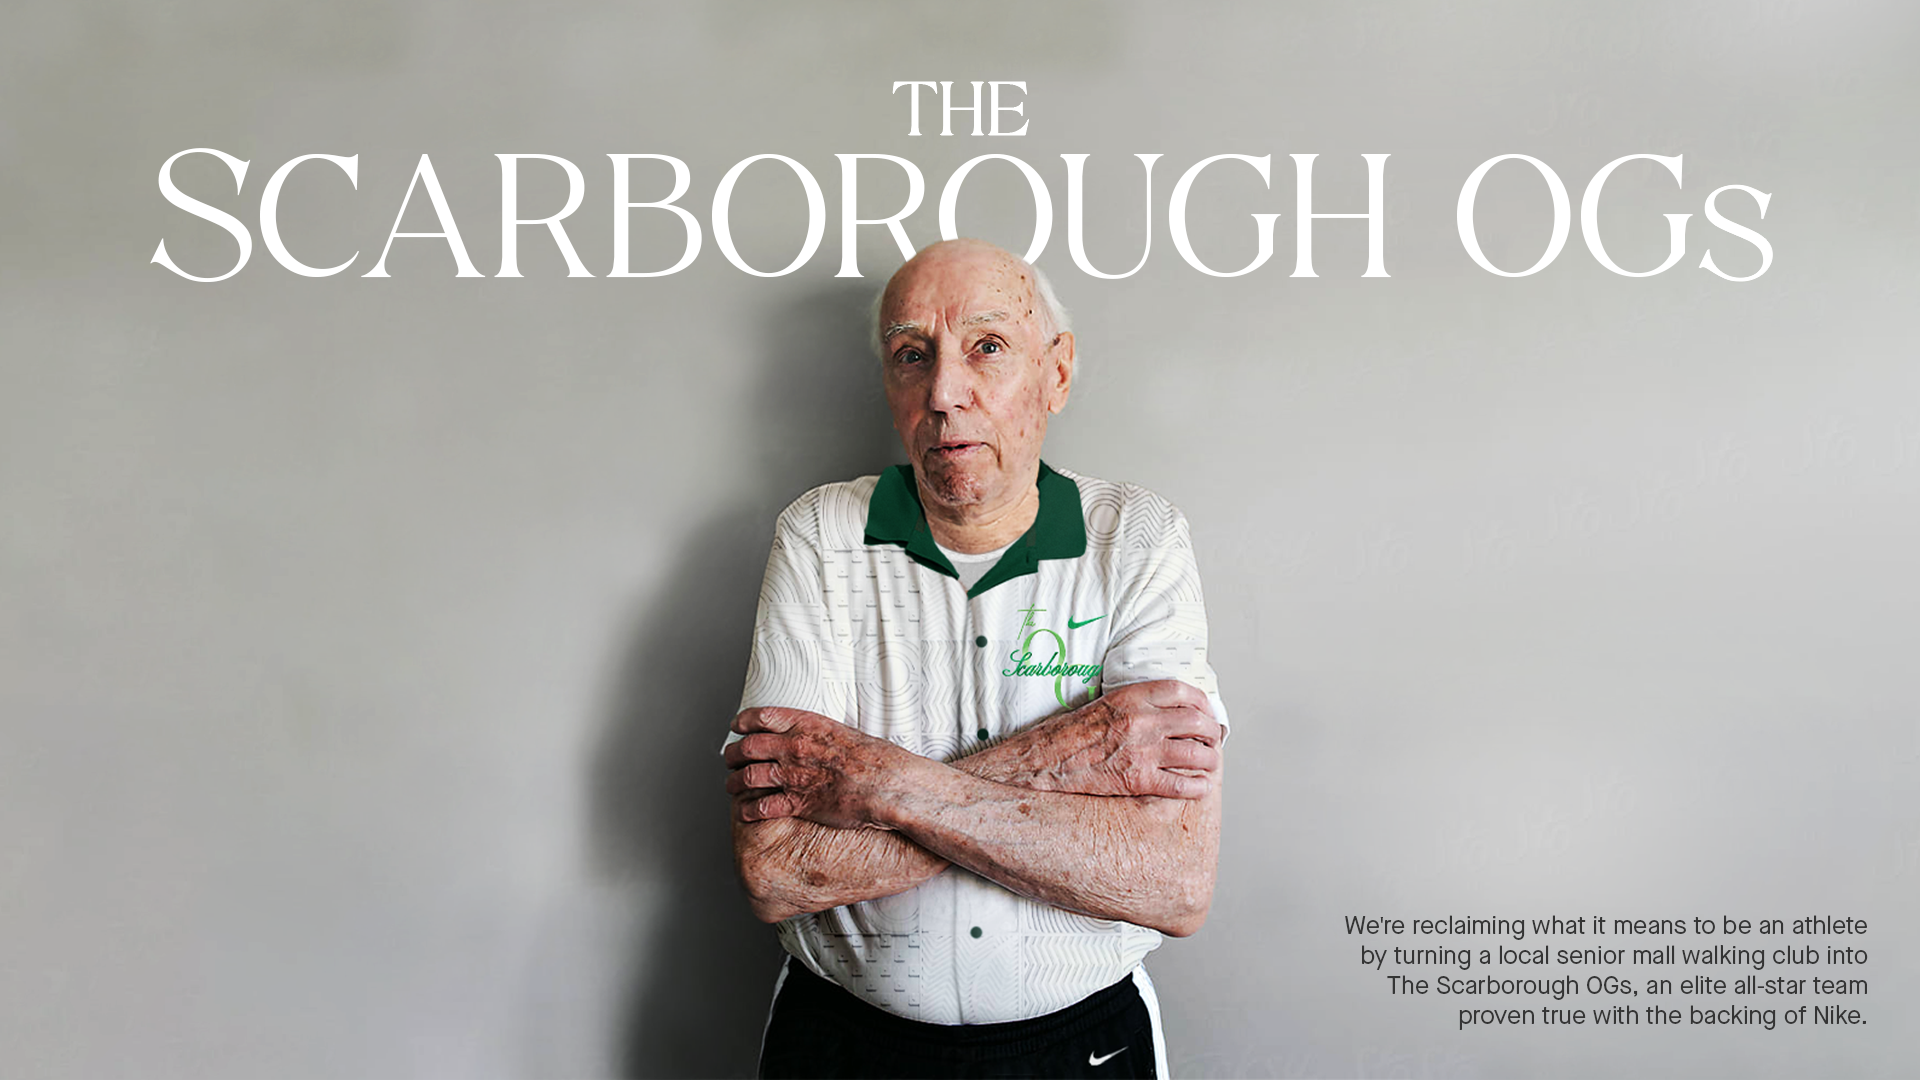 The Scarborough OGs